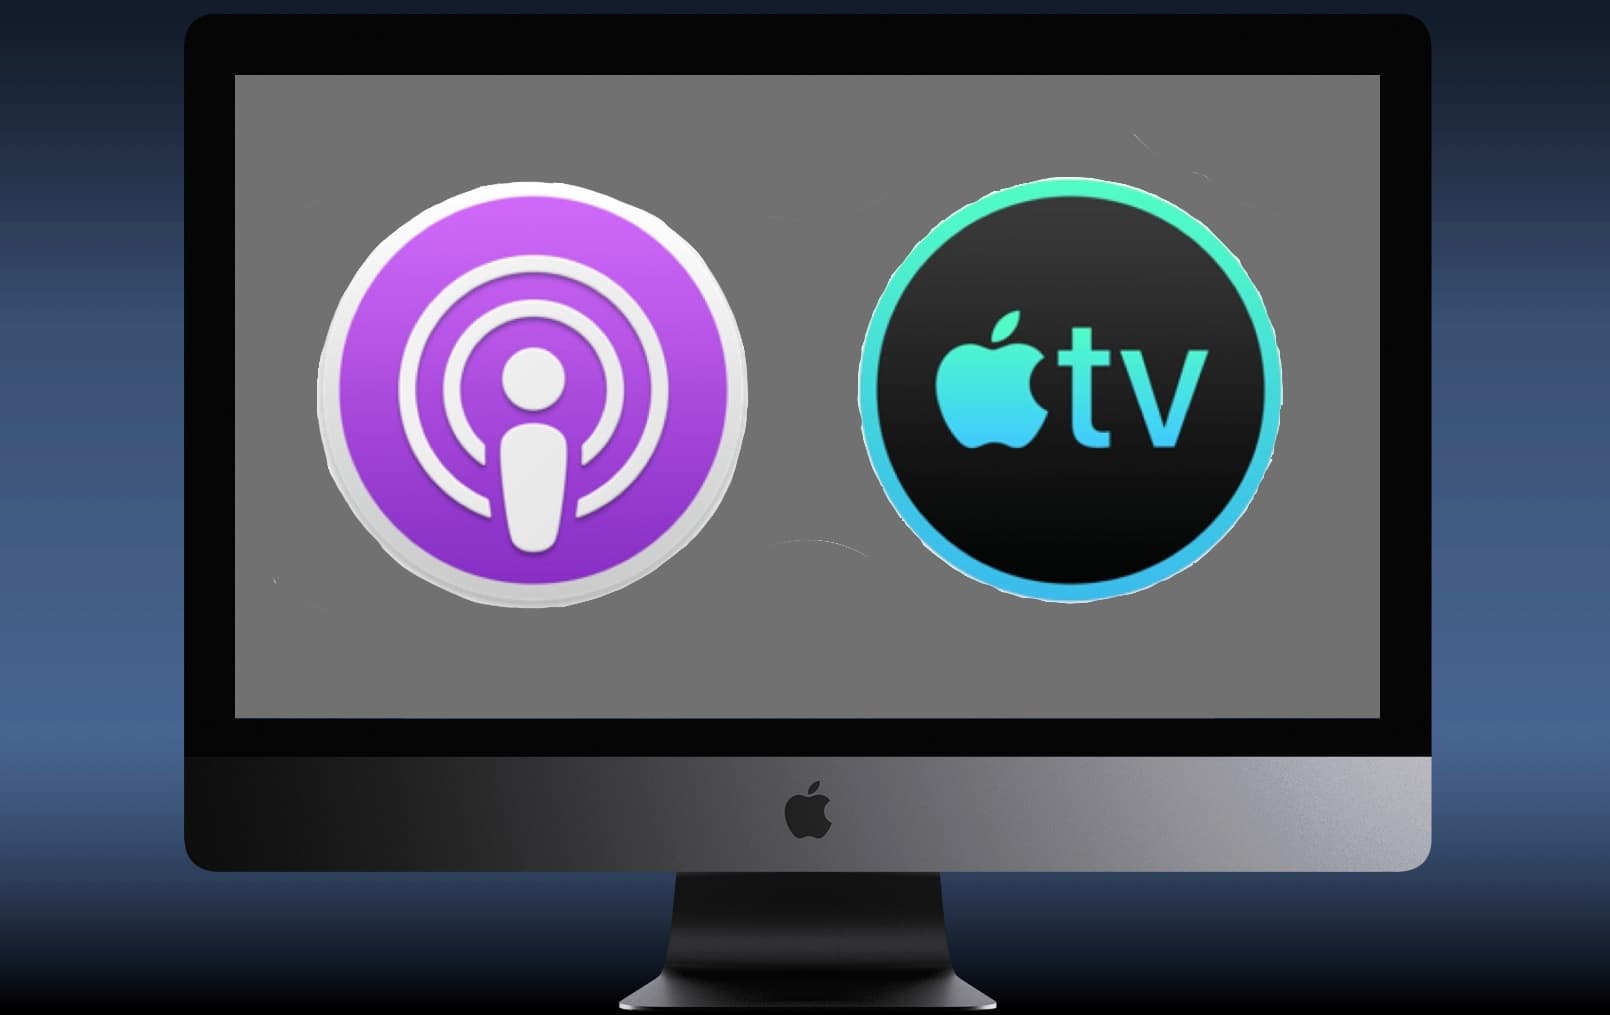 Podcasts and Apple TV are among the applications expected to make the jump from iOS to macOS 10.15.